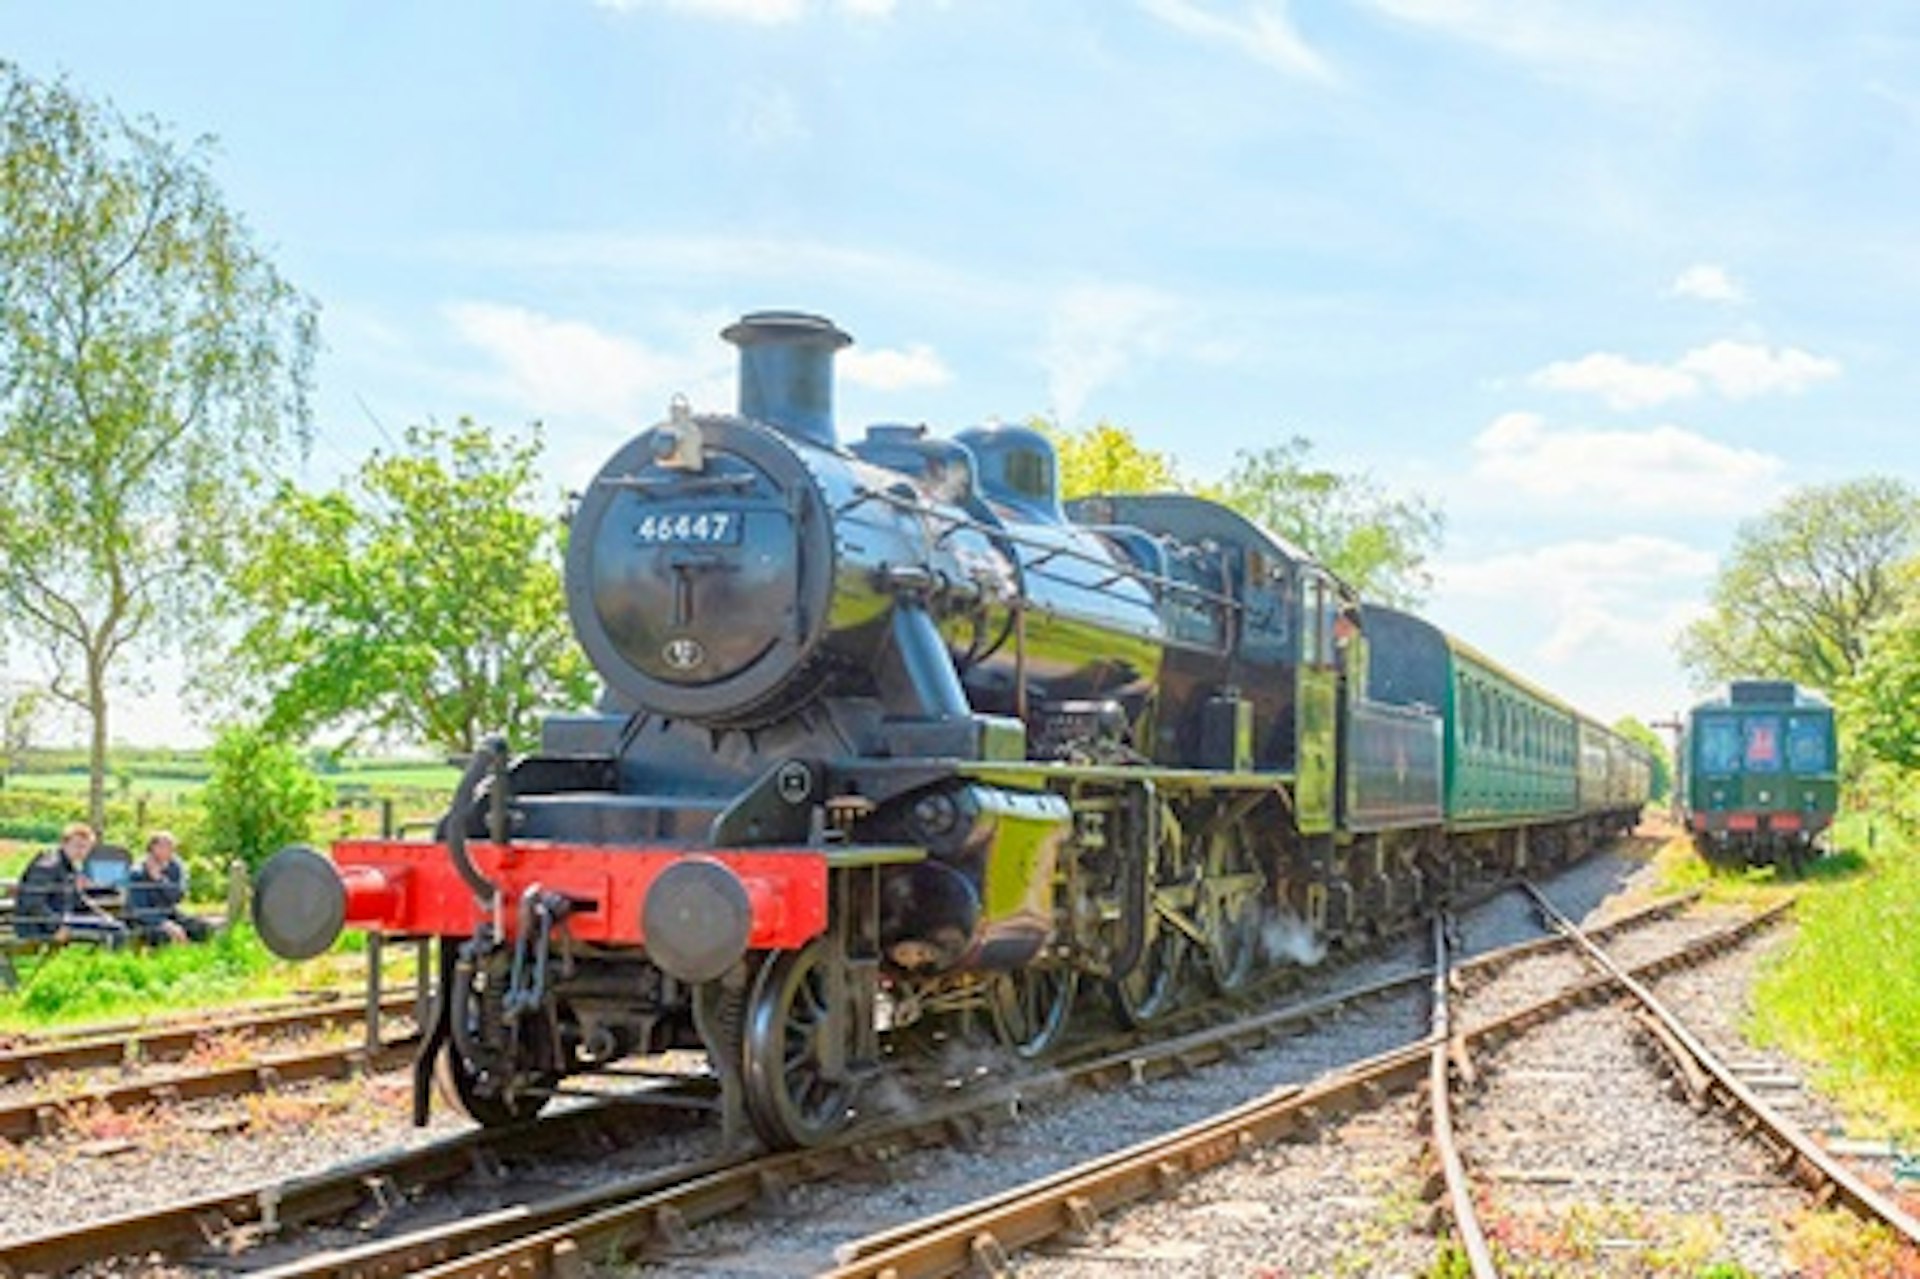 Family Steam Train Trip with East Somerset Railway 1